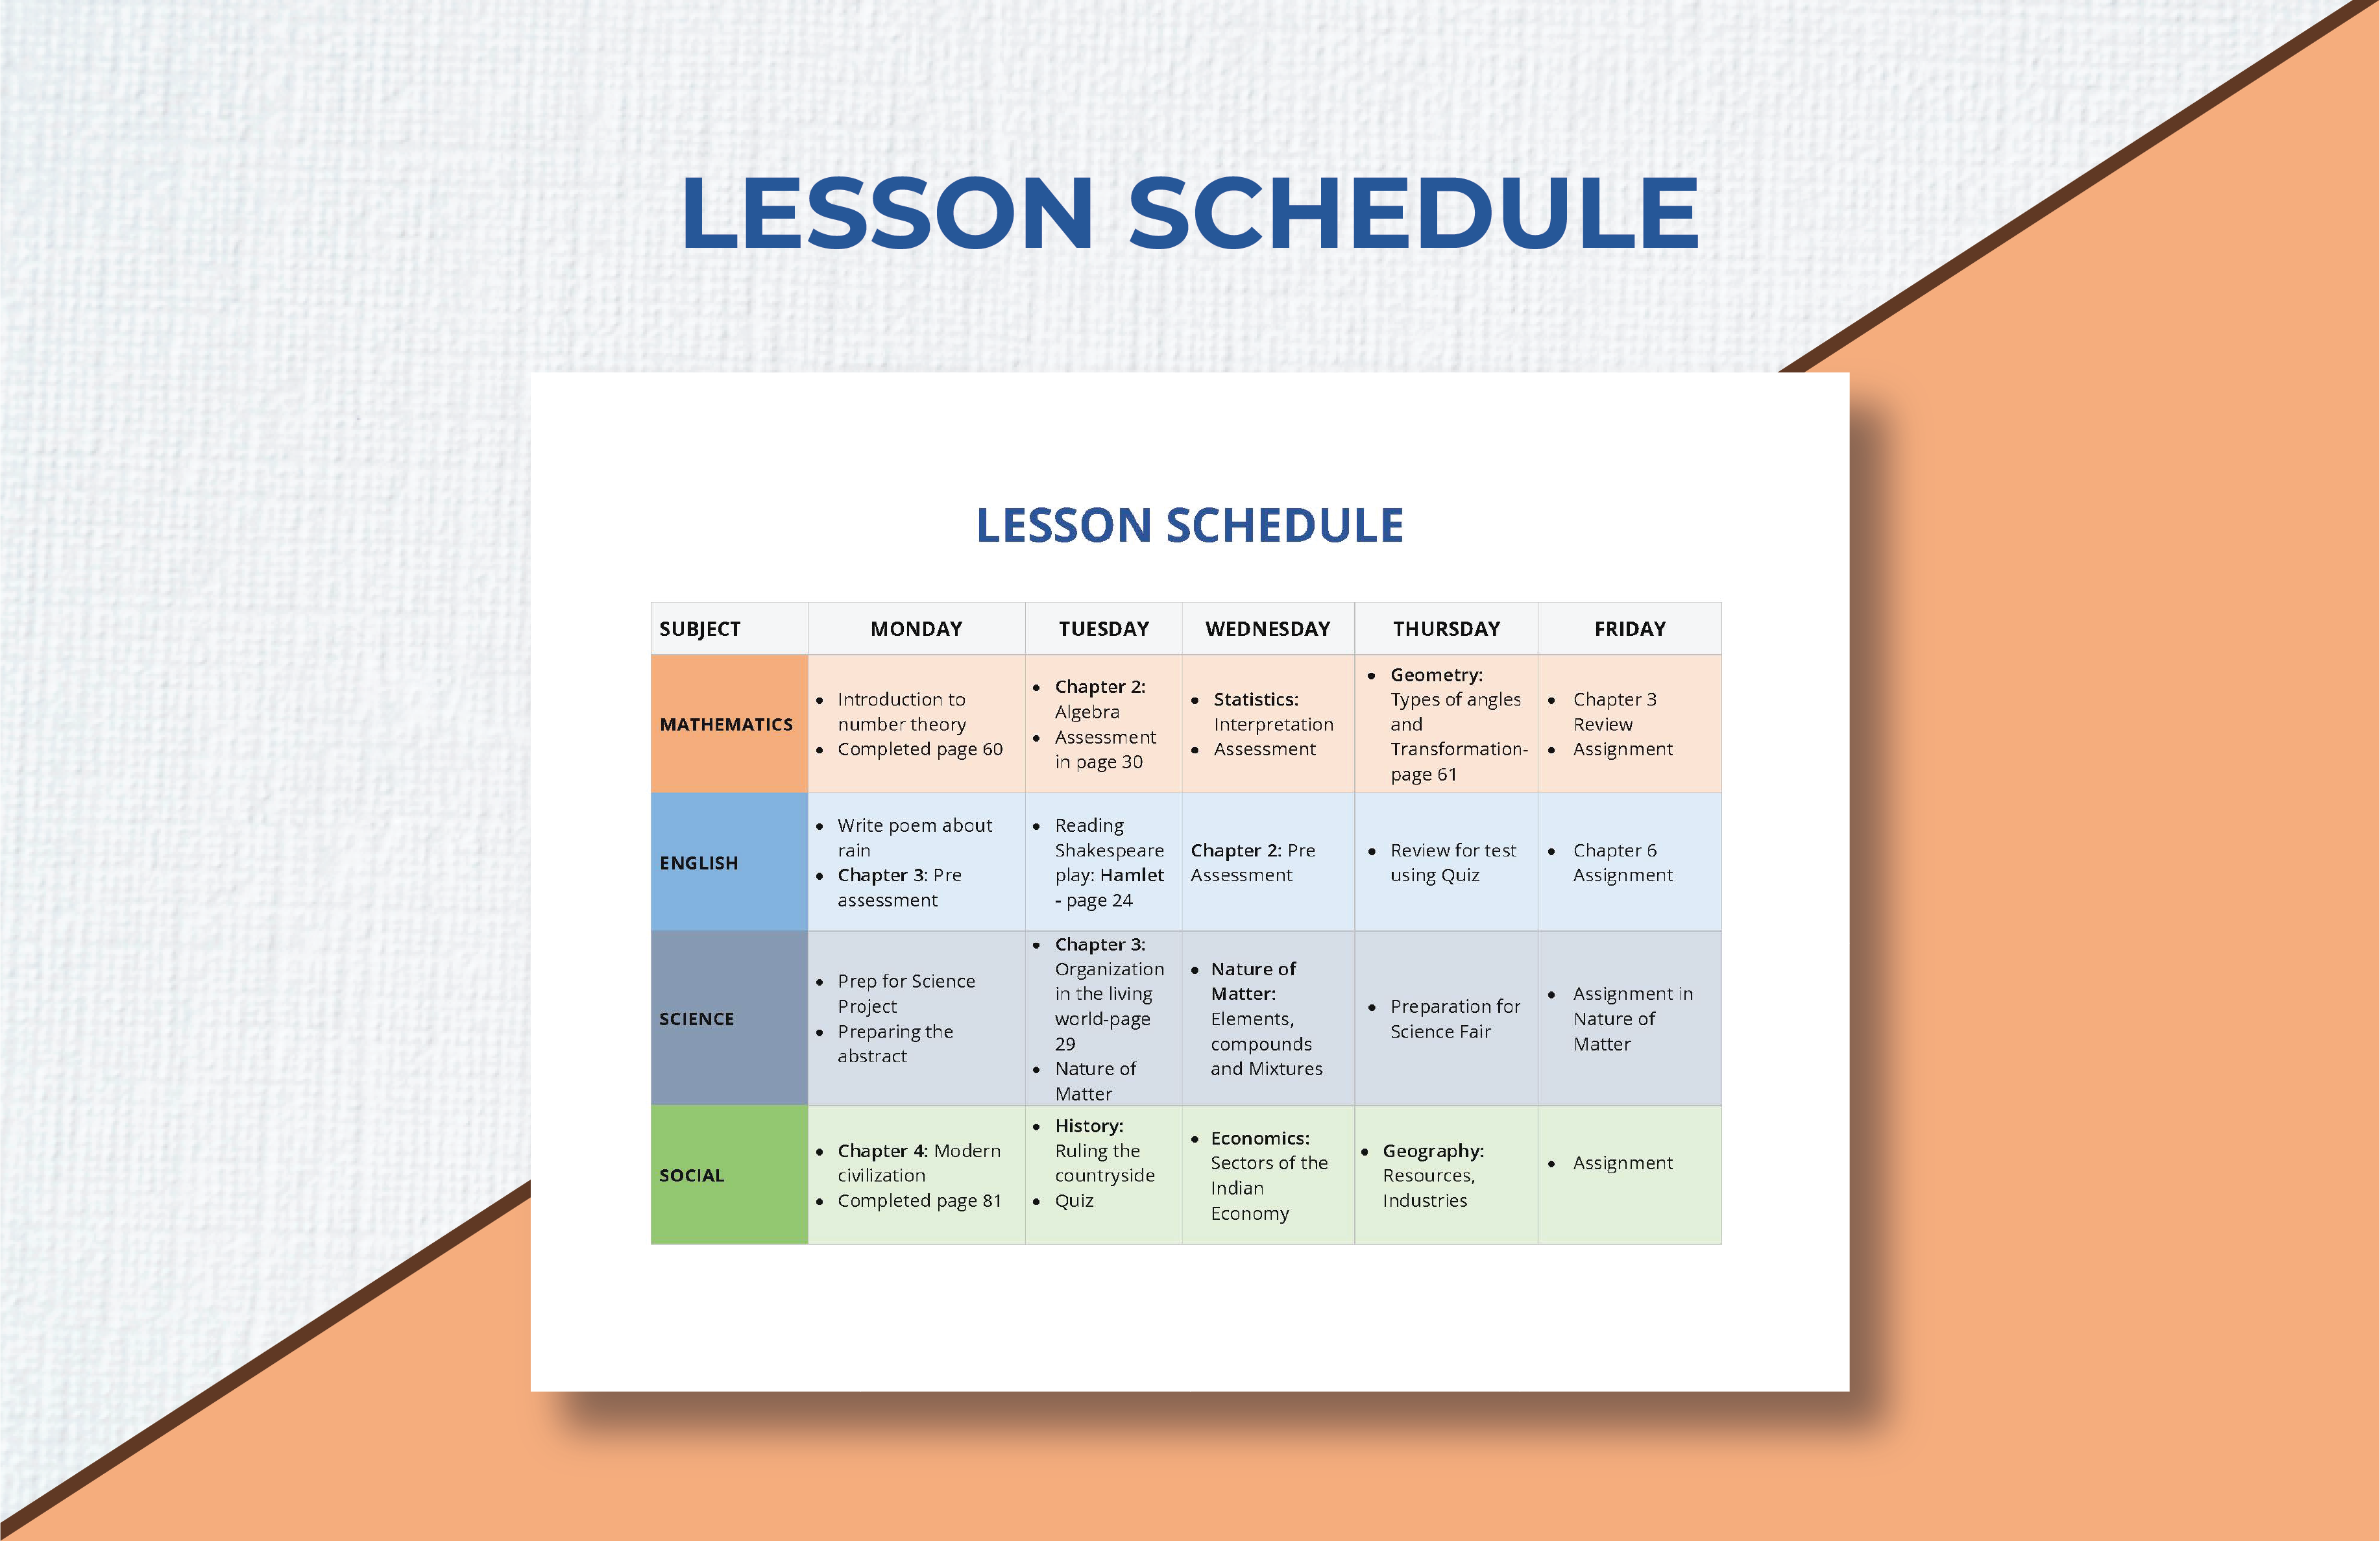 Lesson Schedule Template Download in Word, Google Docs, Apple Pages